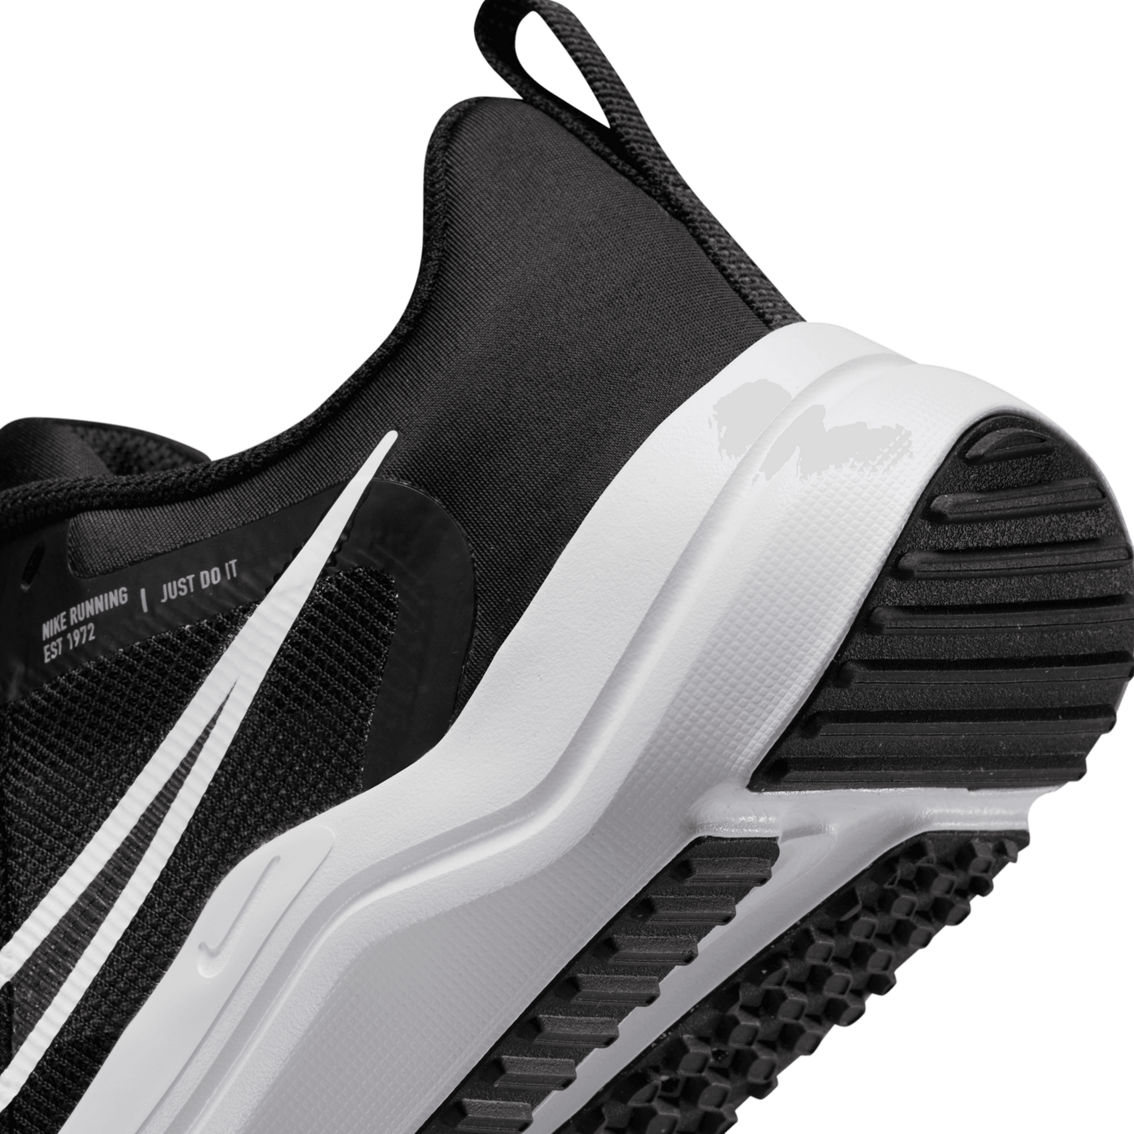 Nike Women's Downshifter 12 Road Running Shoes - Image 8 of 8